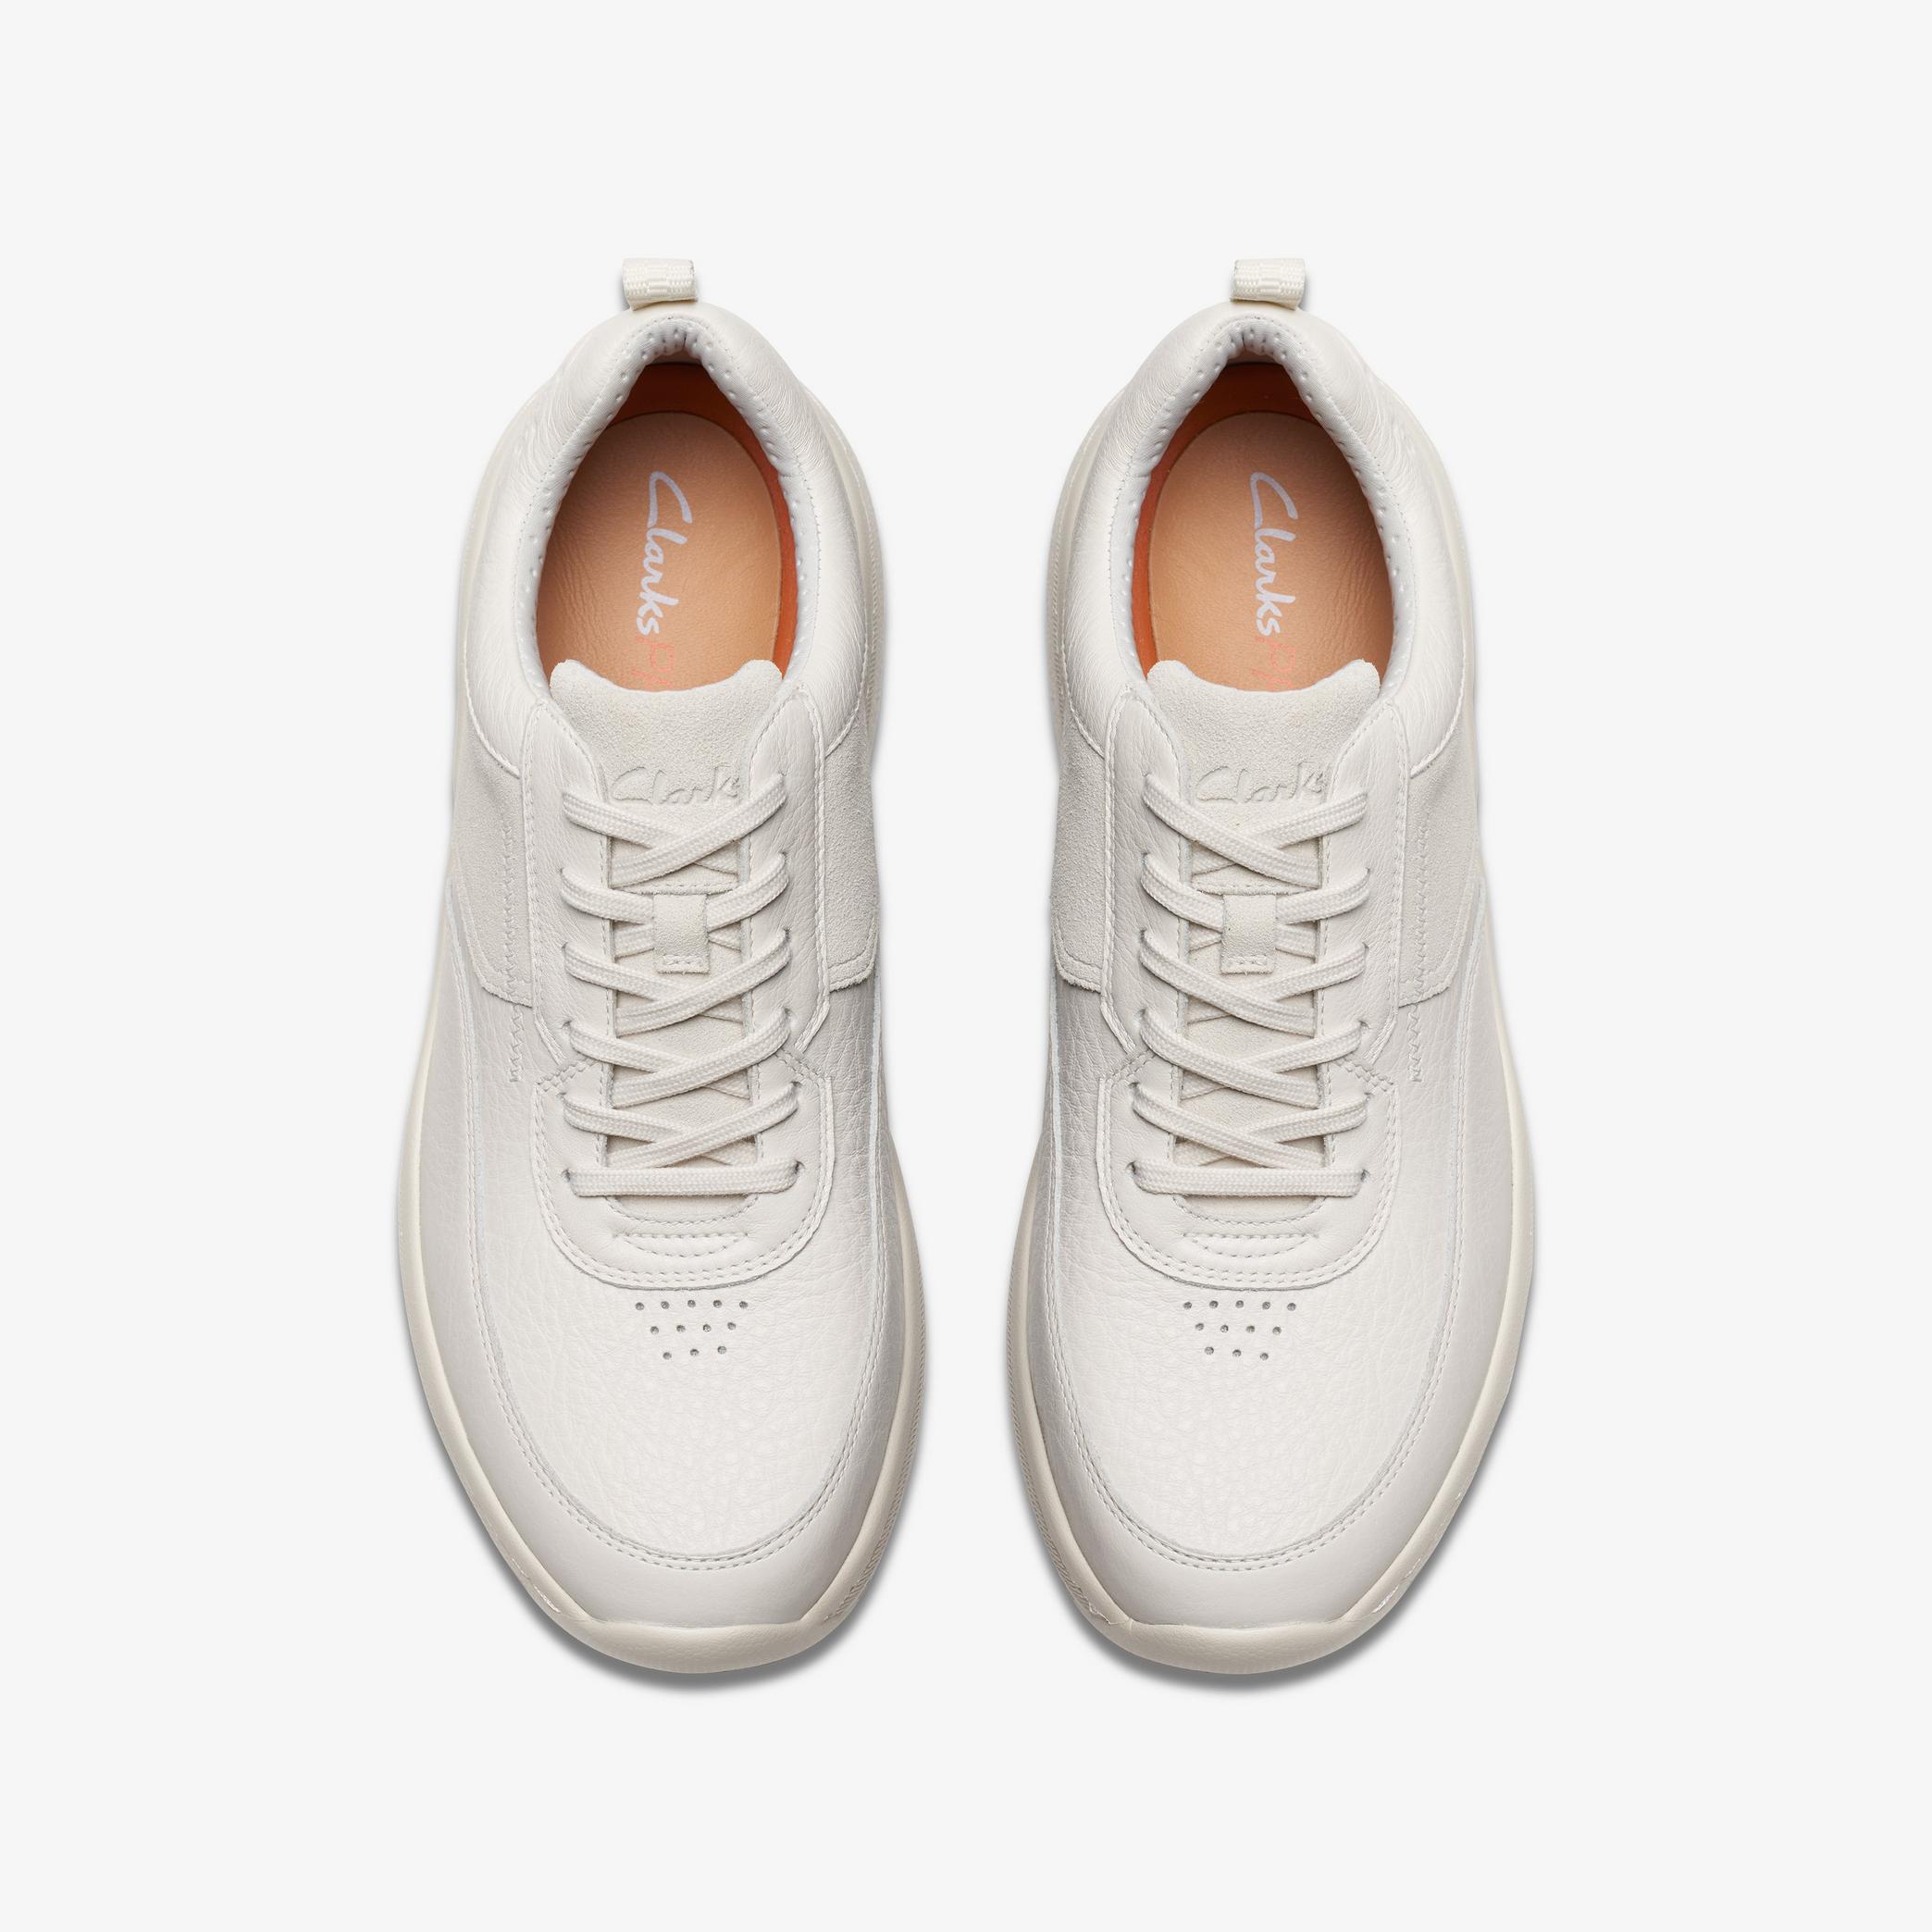 MENS Clarks Pro Lace White Leather Sneakers | Clarks US